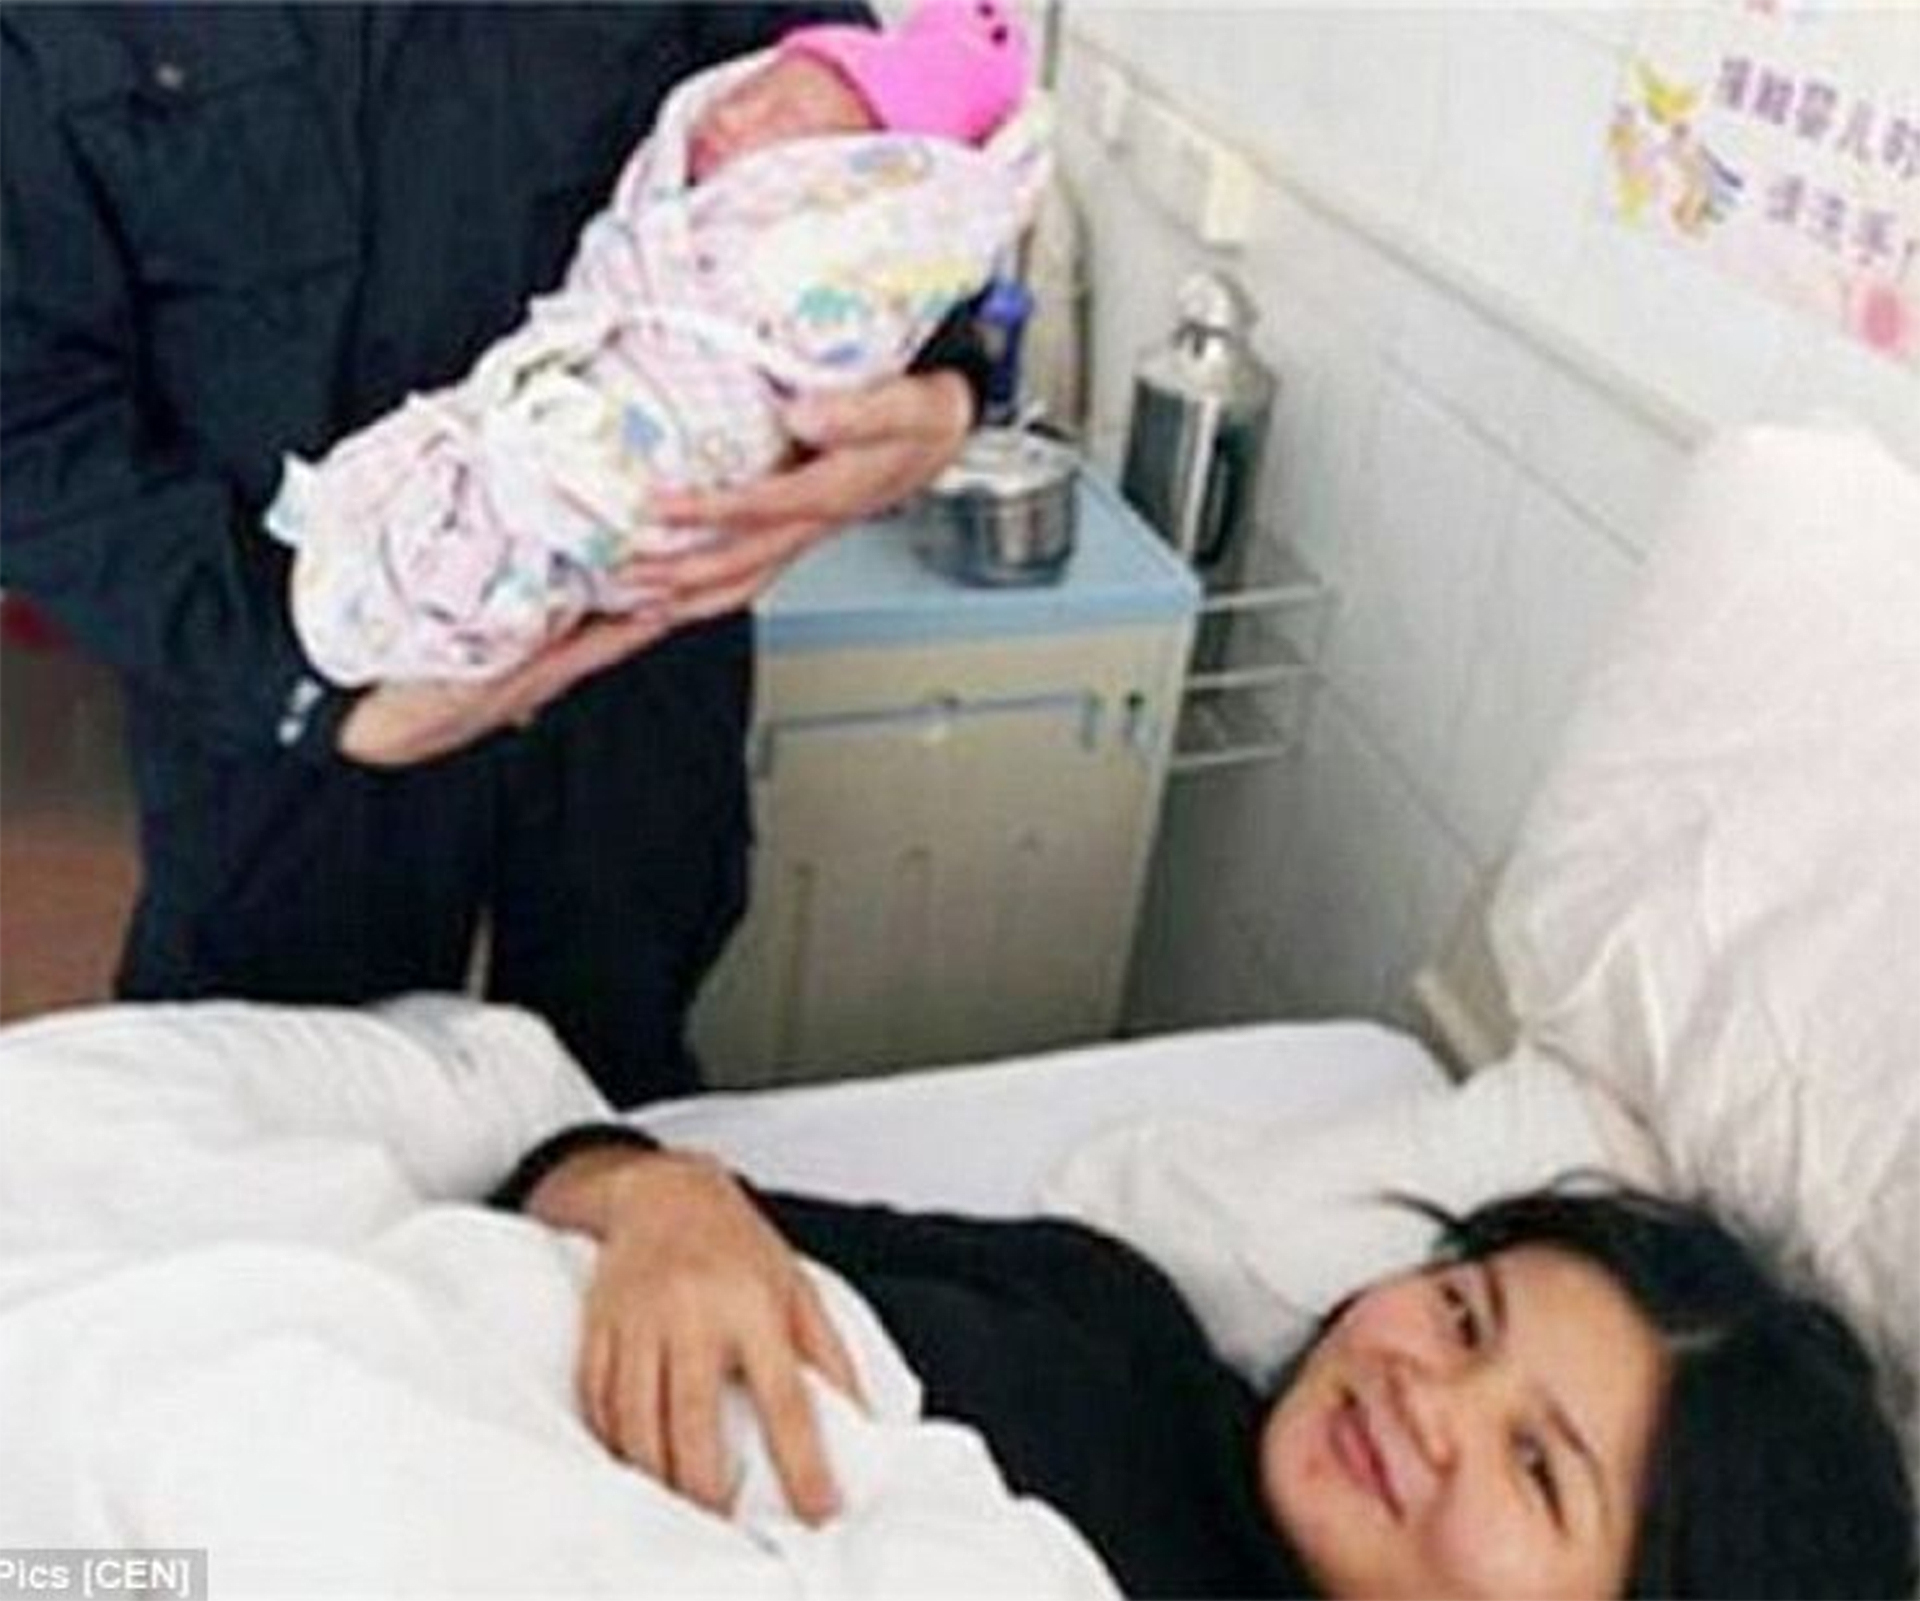 Surprise! Labouring mother arrives at hospital to find out she’s already given birth